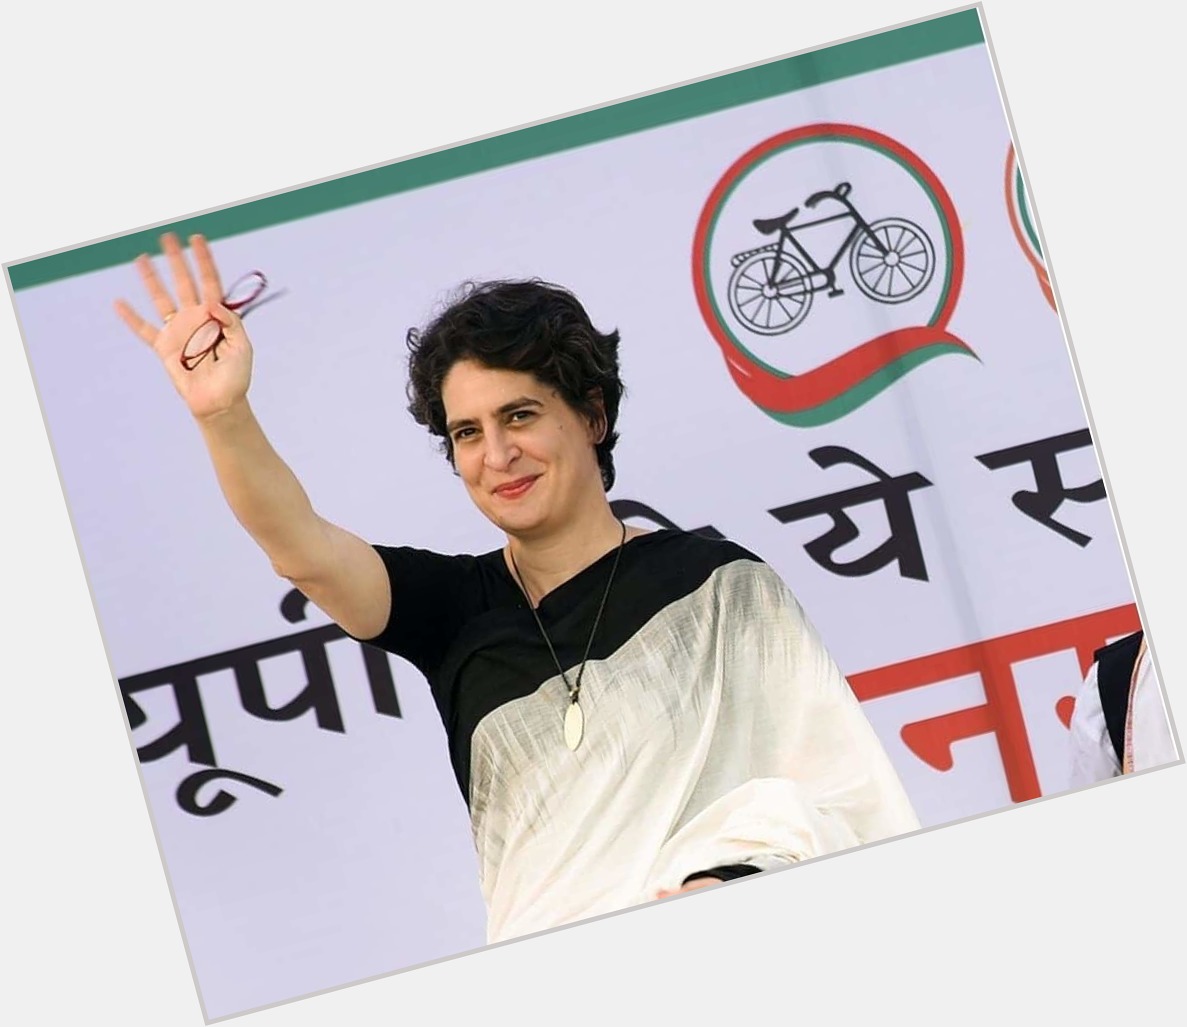 Wish You A Very Very HAPPY BIRTHDAY      PRIYANKA GANDHI VADRA JI
You are ideal icon for youths.. 